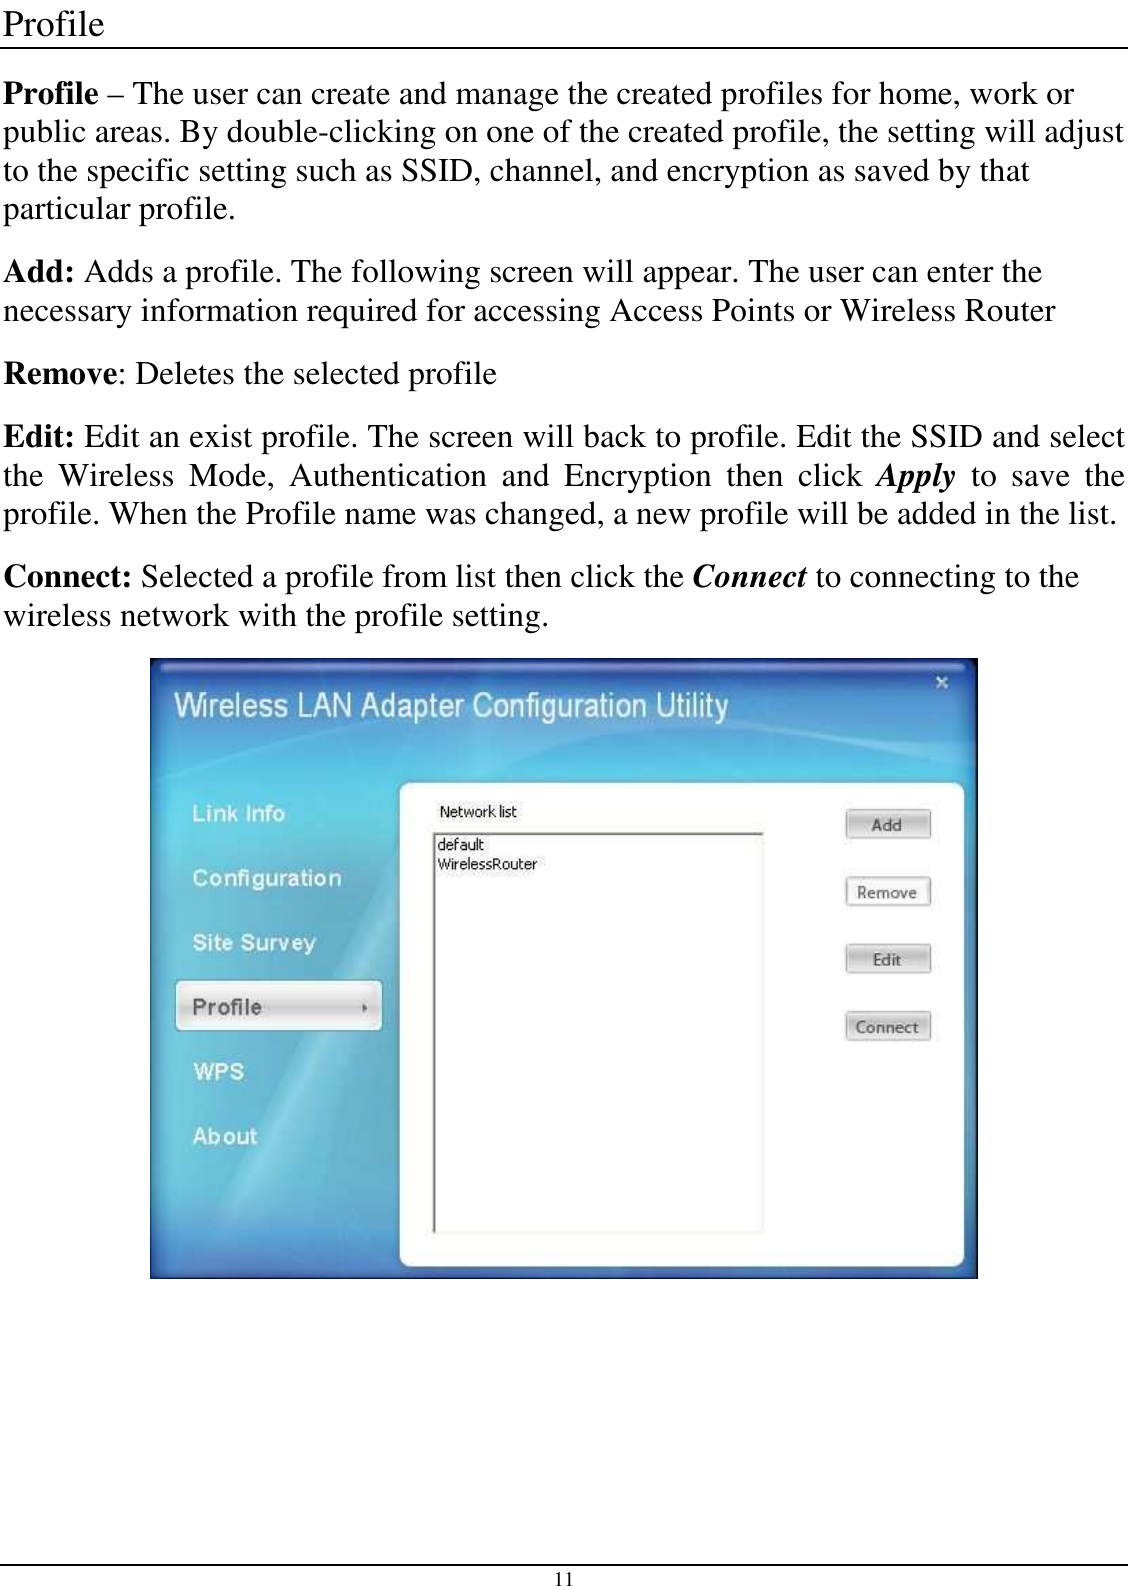 11 Profile Profile – The user can create and manage the created profiles for home, work or public areas. By double-clicking on one of the created profile, the setting will adjust to the specific setting such as SSID, channel, and encryption as saved by that particular profile. Add: Adds a profile. The following screen will appear. The user can enter the necessary information required for accessing Access Points or Wireless Router Remove: Deletes the selected profile Edit: Edit an exist profile. The screen will back to profile. Edit the SSID and select the  Wireless  Mode,  Authentication  and  Encryption  then  click  Apply  to  save  the profile. When the Profile name was changed, a new profile will be added in the list. Connect: Selected a profile from list then click the Connect to connecting to the wireless network with the profile setting.   